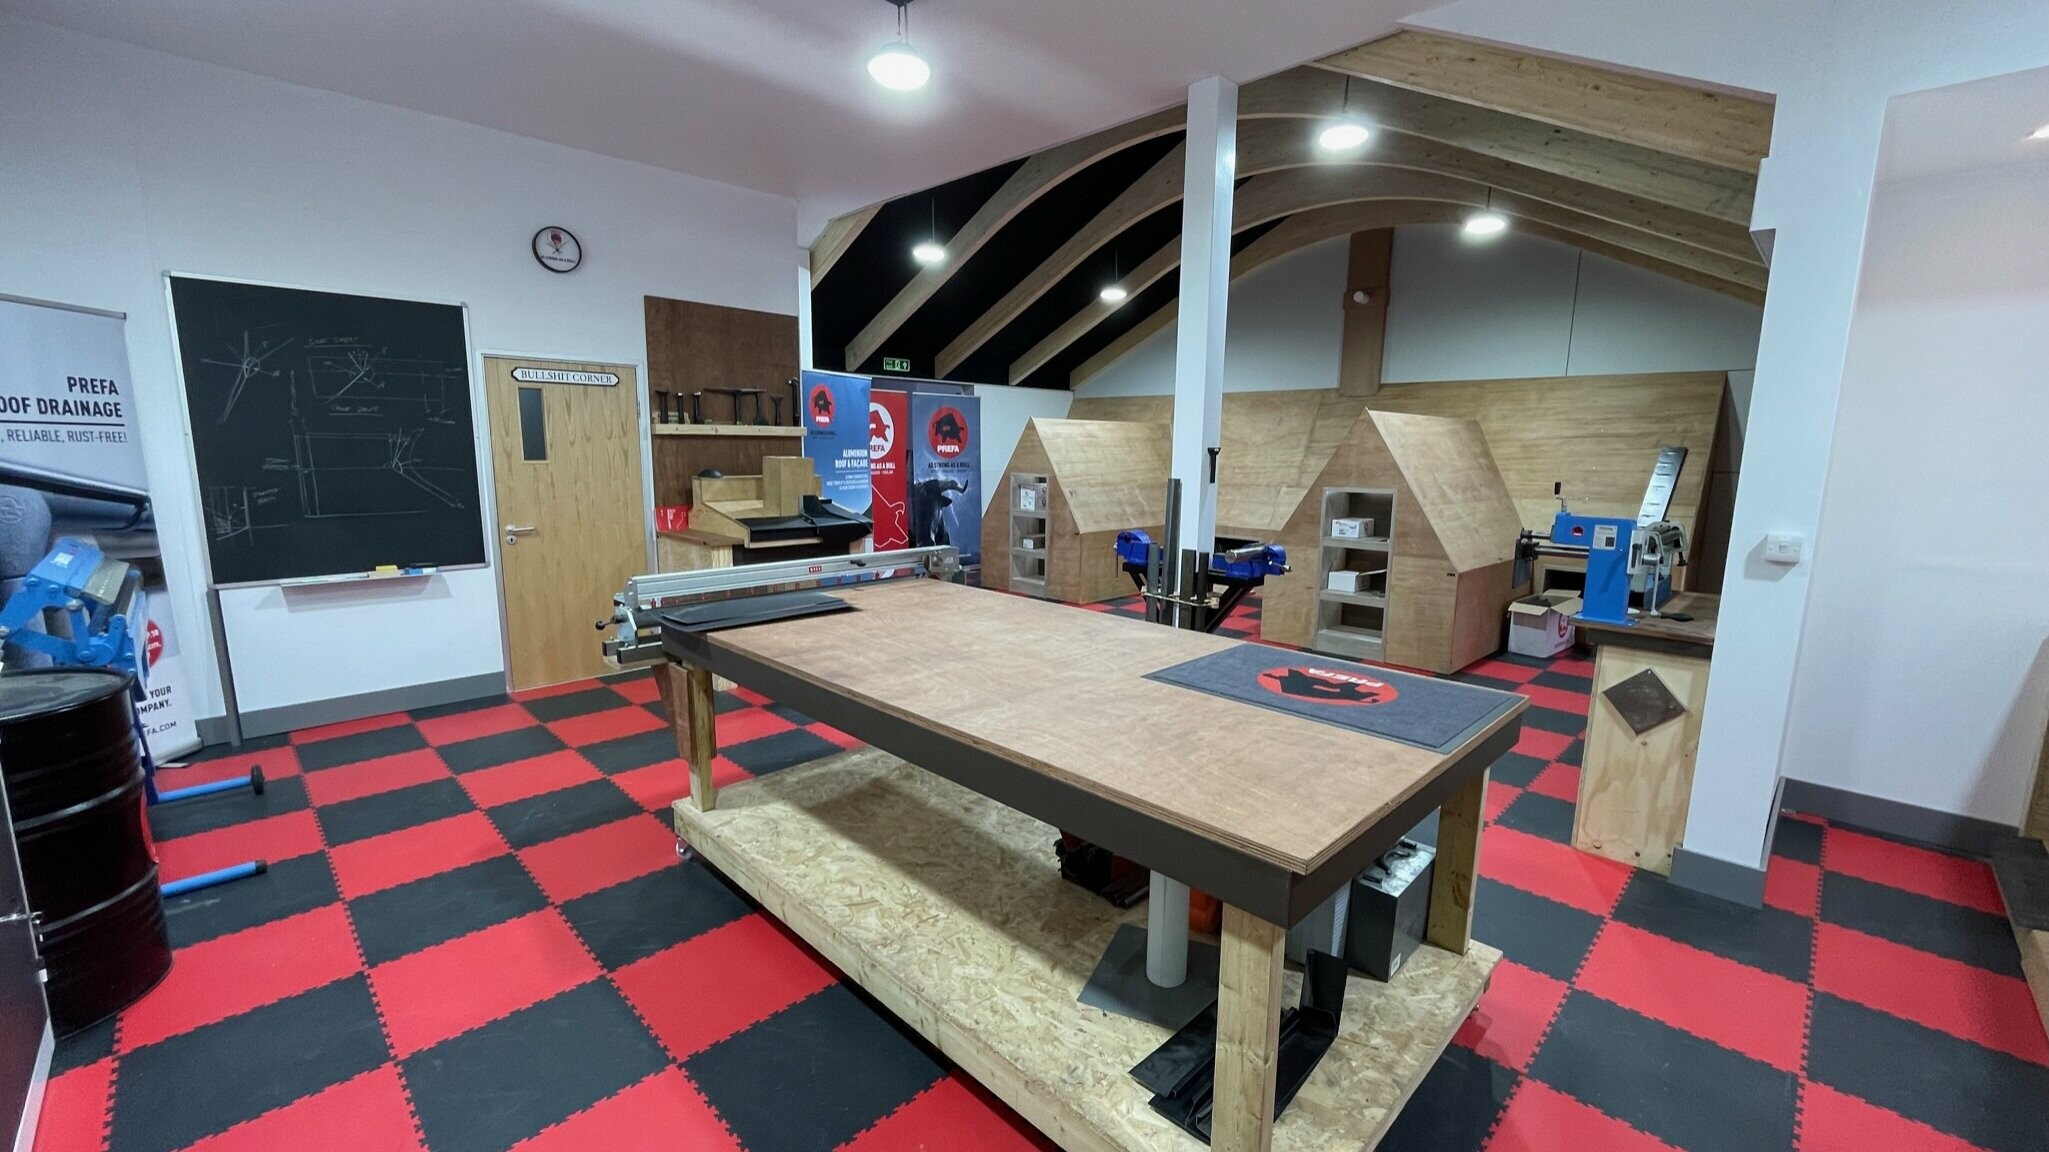 Photograph of an interior of the newly opened PREFA Academy in the UK.